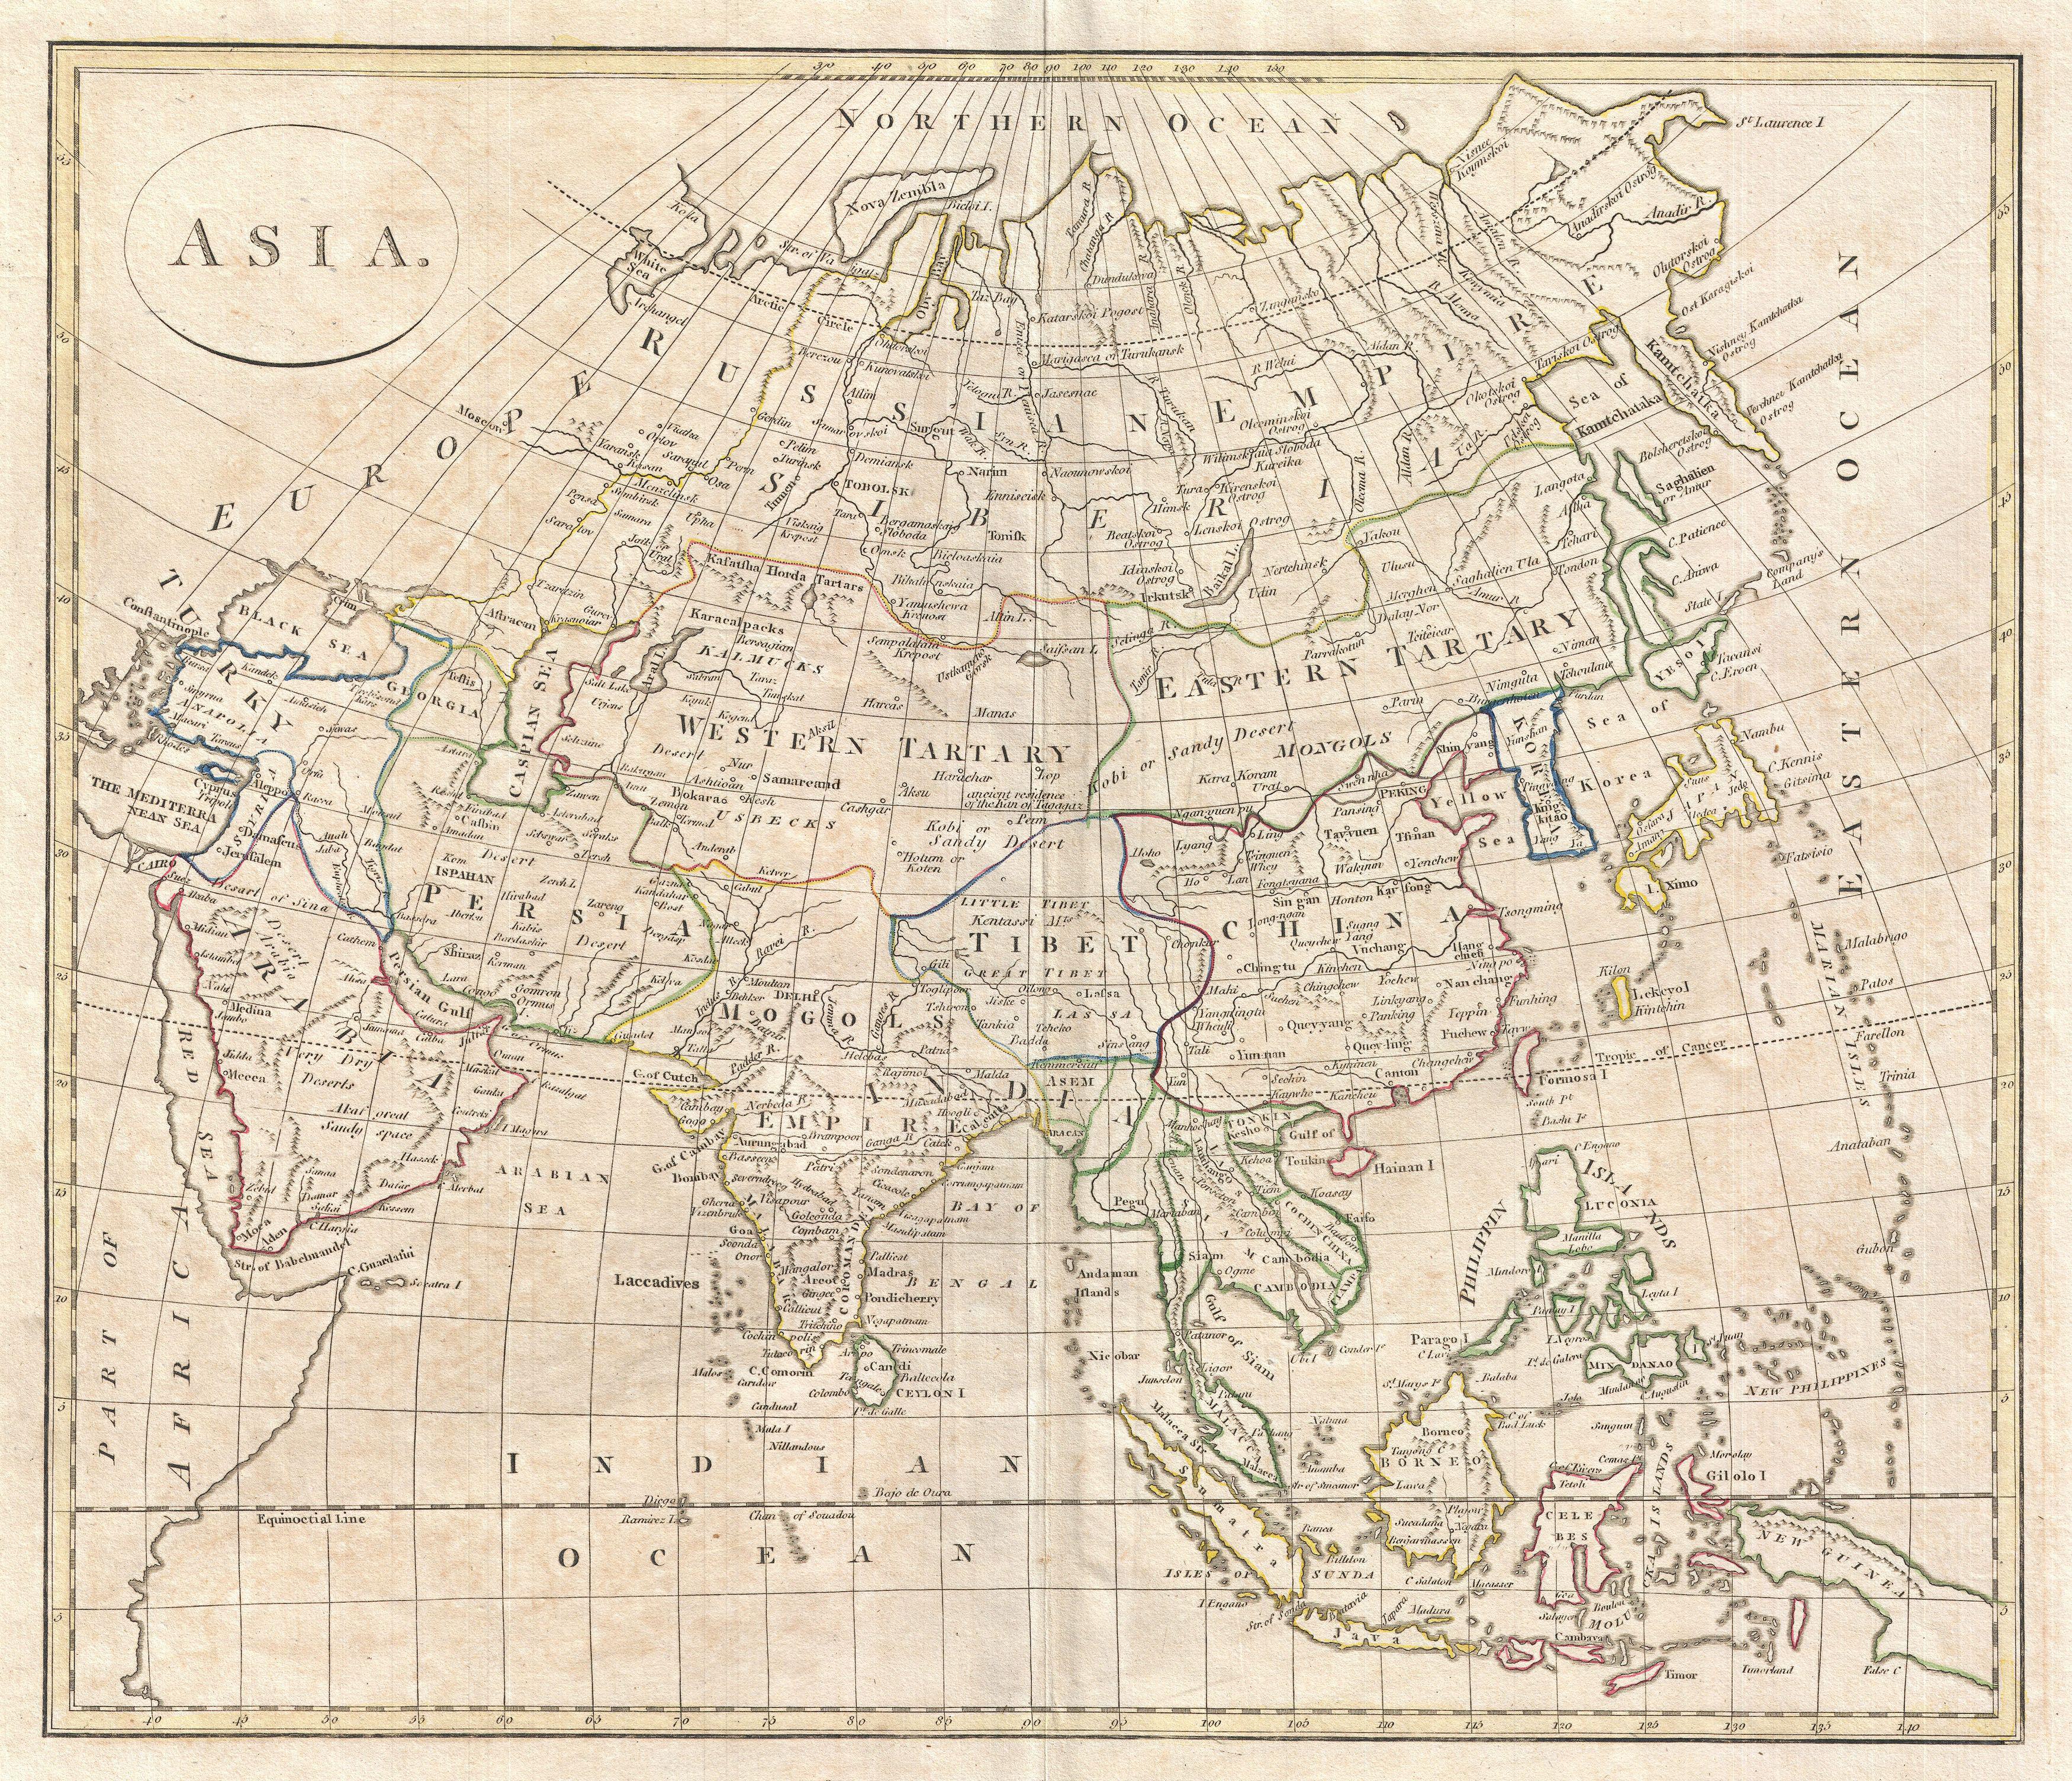 http://upload.wikimedia.org/wikipedia/commons/5/52/1799_Clement_Cruttwell_Map_of_Asia_-_Geographicus_-_Asia-cruttwell-1799.jpg